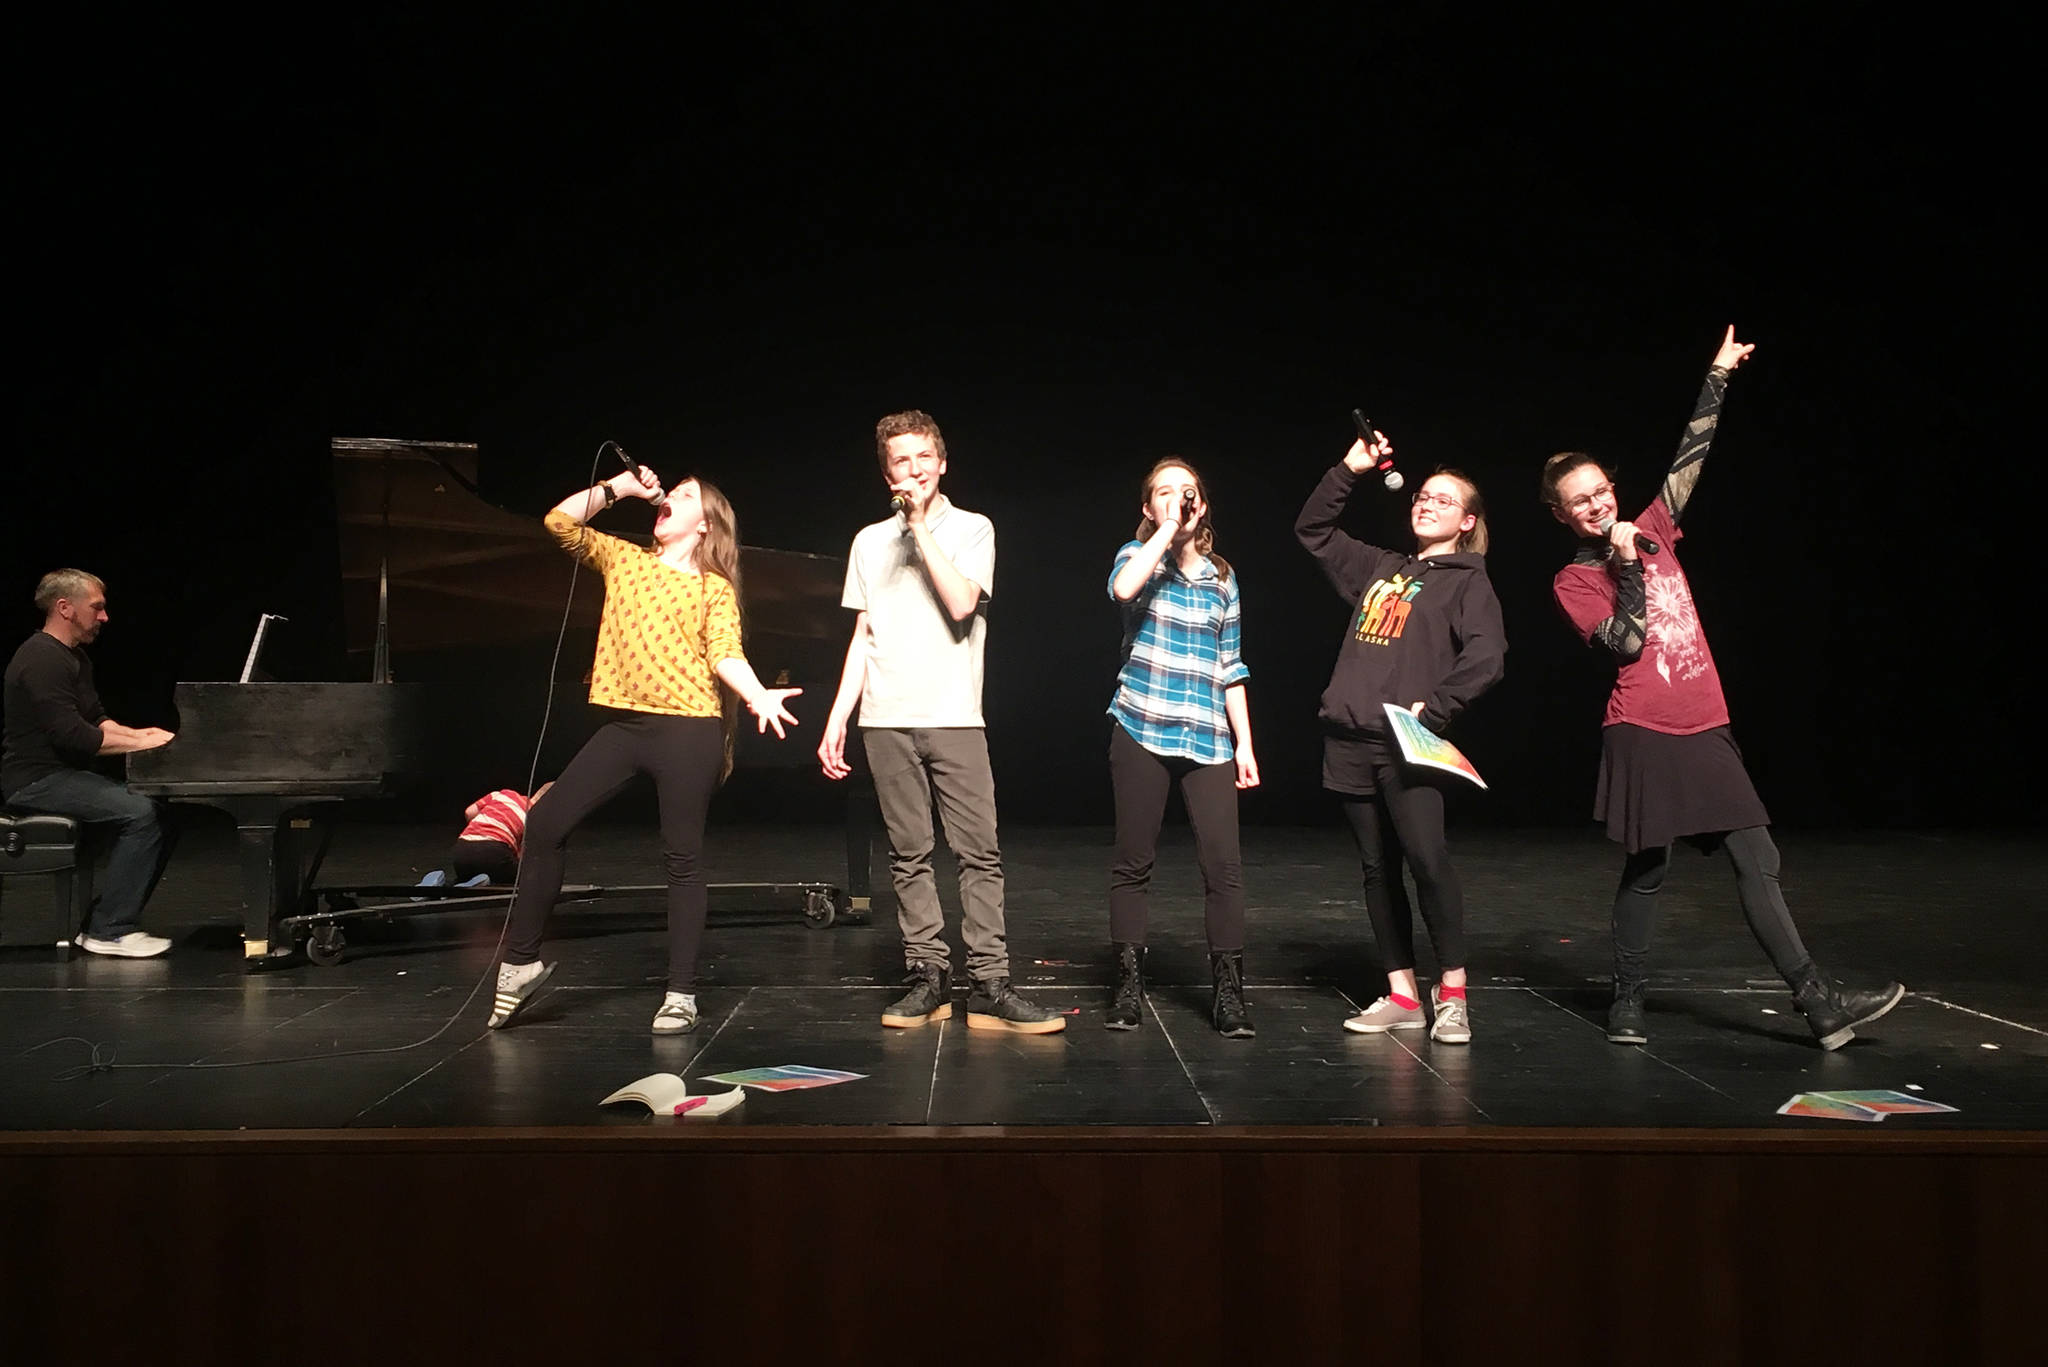 Performers in “Kaleidoscope” rehearse on May 5, 2019, at the Mariner Theatre in Homer, Alaska. (Photo by Tia Pietsch)